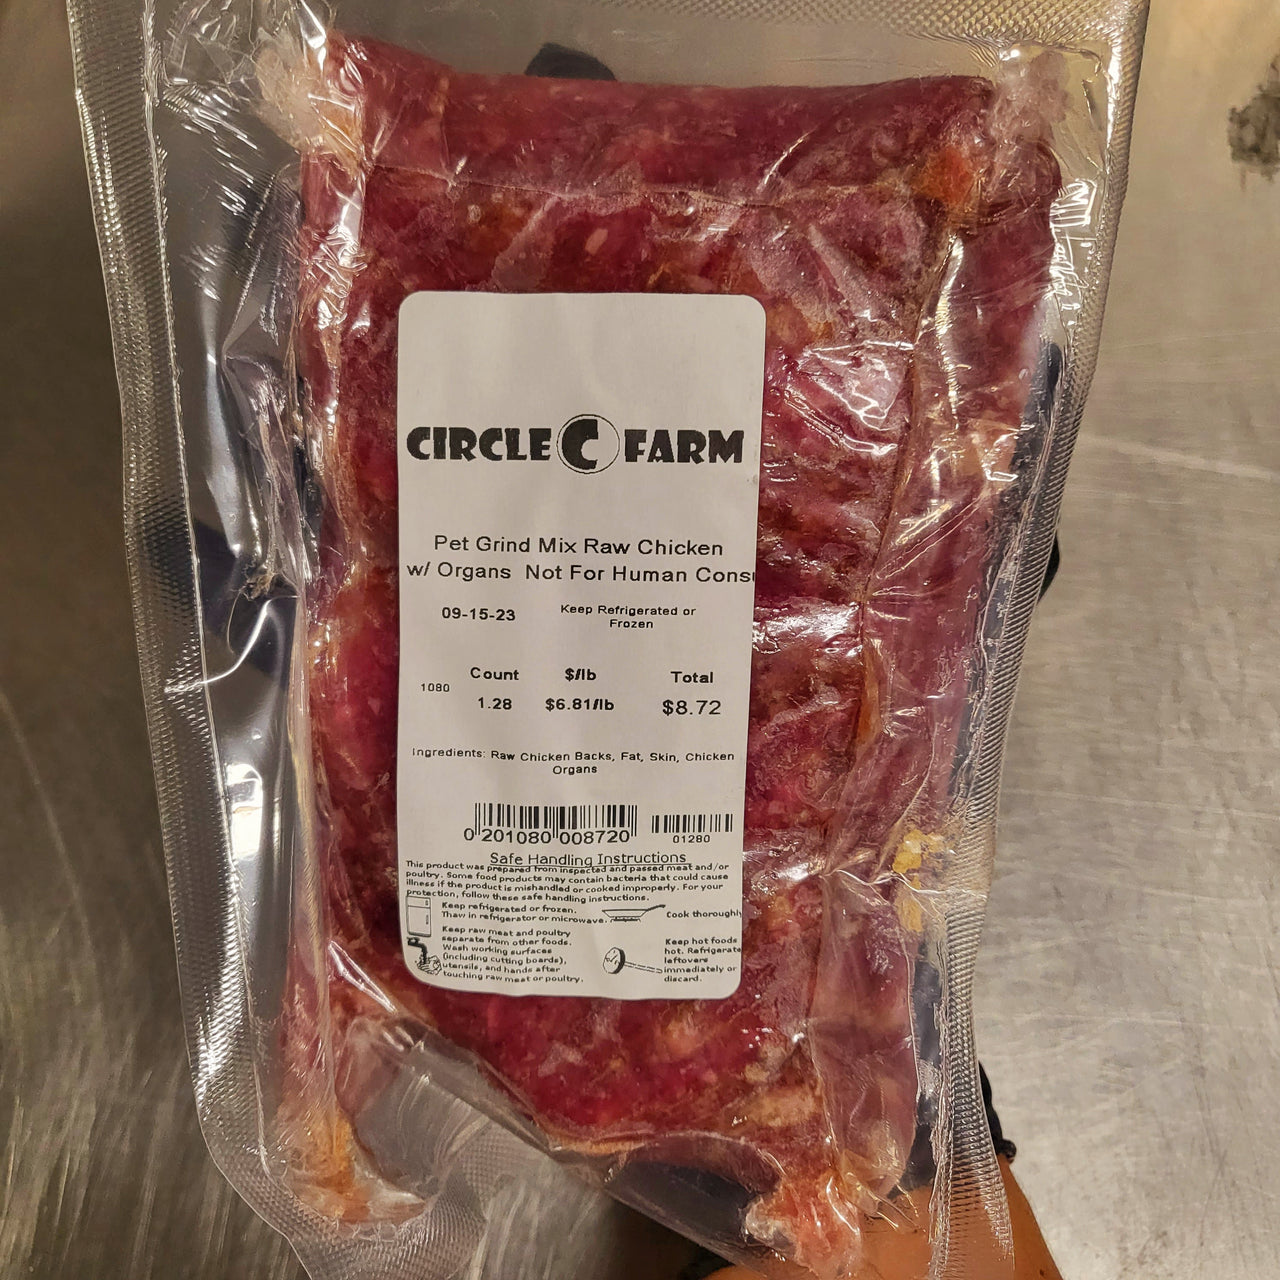 RAW Pet Grind Mix: Chicken Backs, Fat, Skin and with Chicken Organs (Avg. Wt 1 lb)